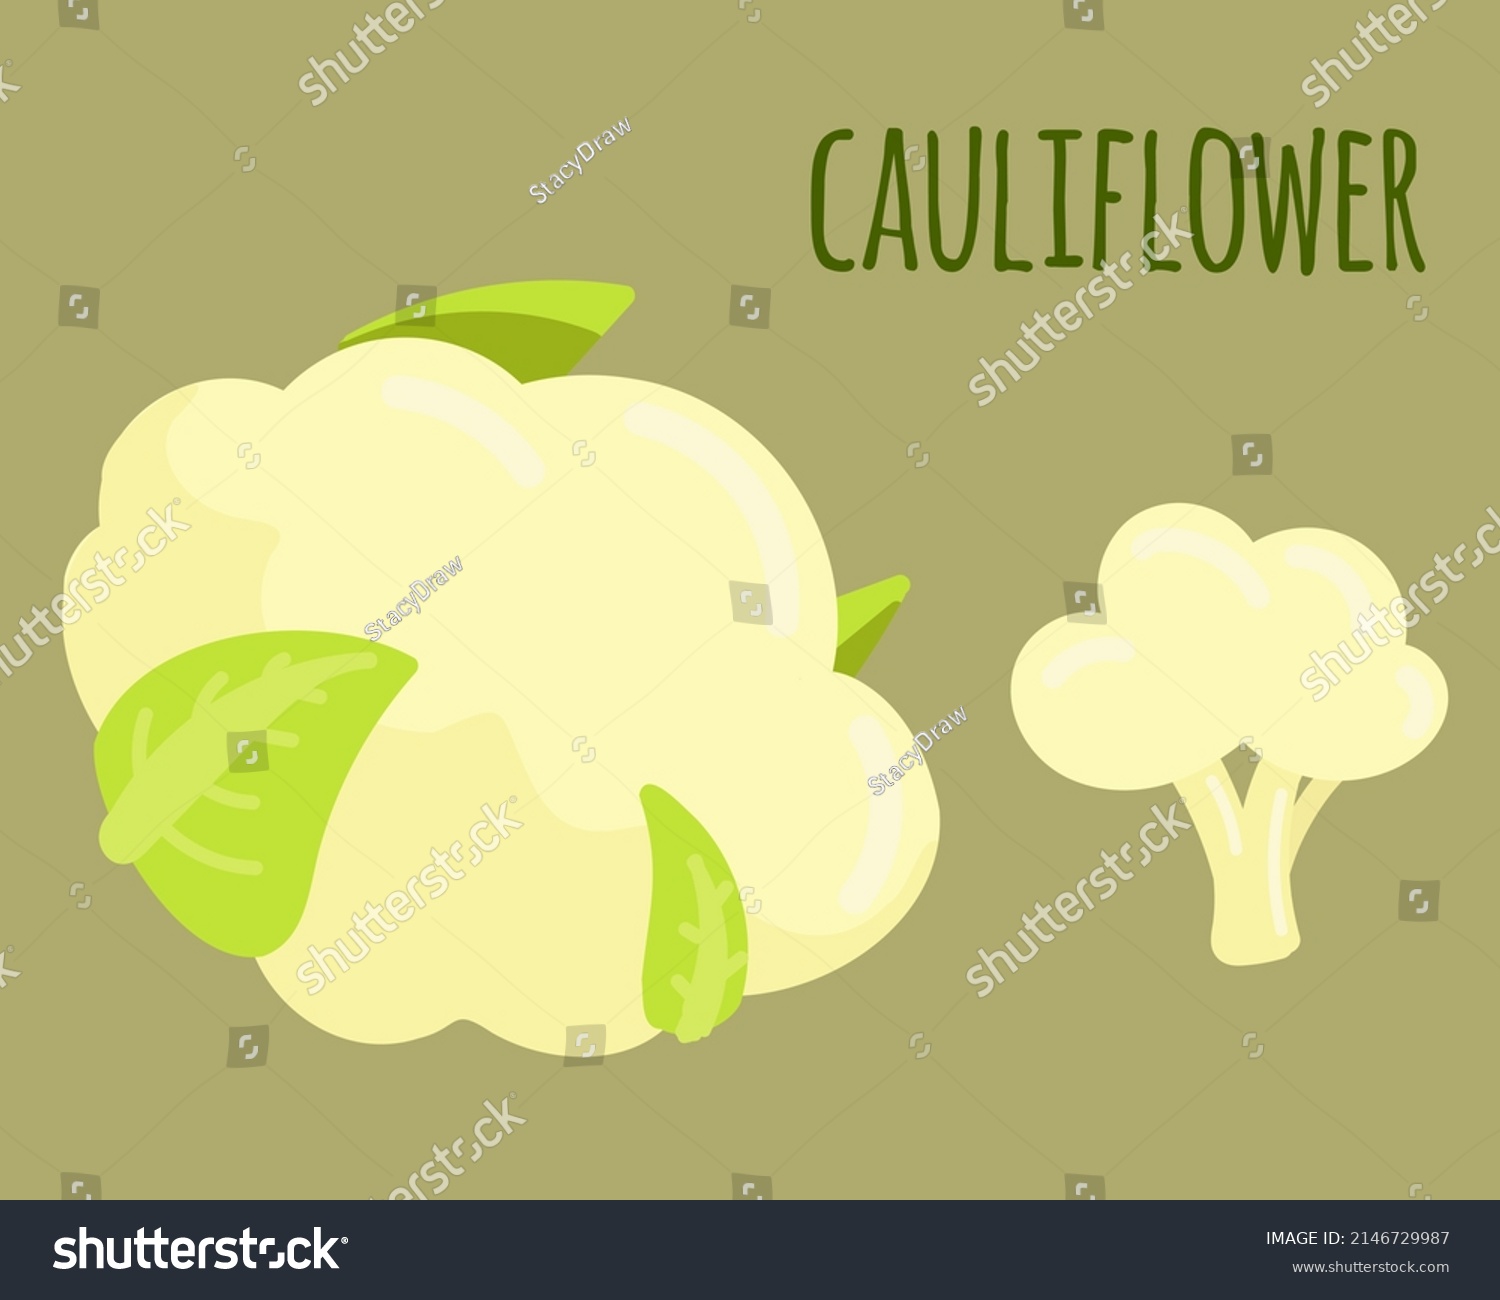 Vector illustration of a cauliflower. Whole vegetable and cut. Suitable for any designs and decorations related to organic food, vegetarian, vegan and garden. #2146729987